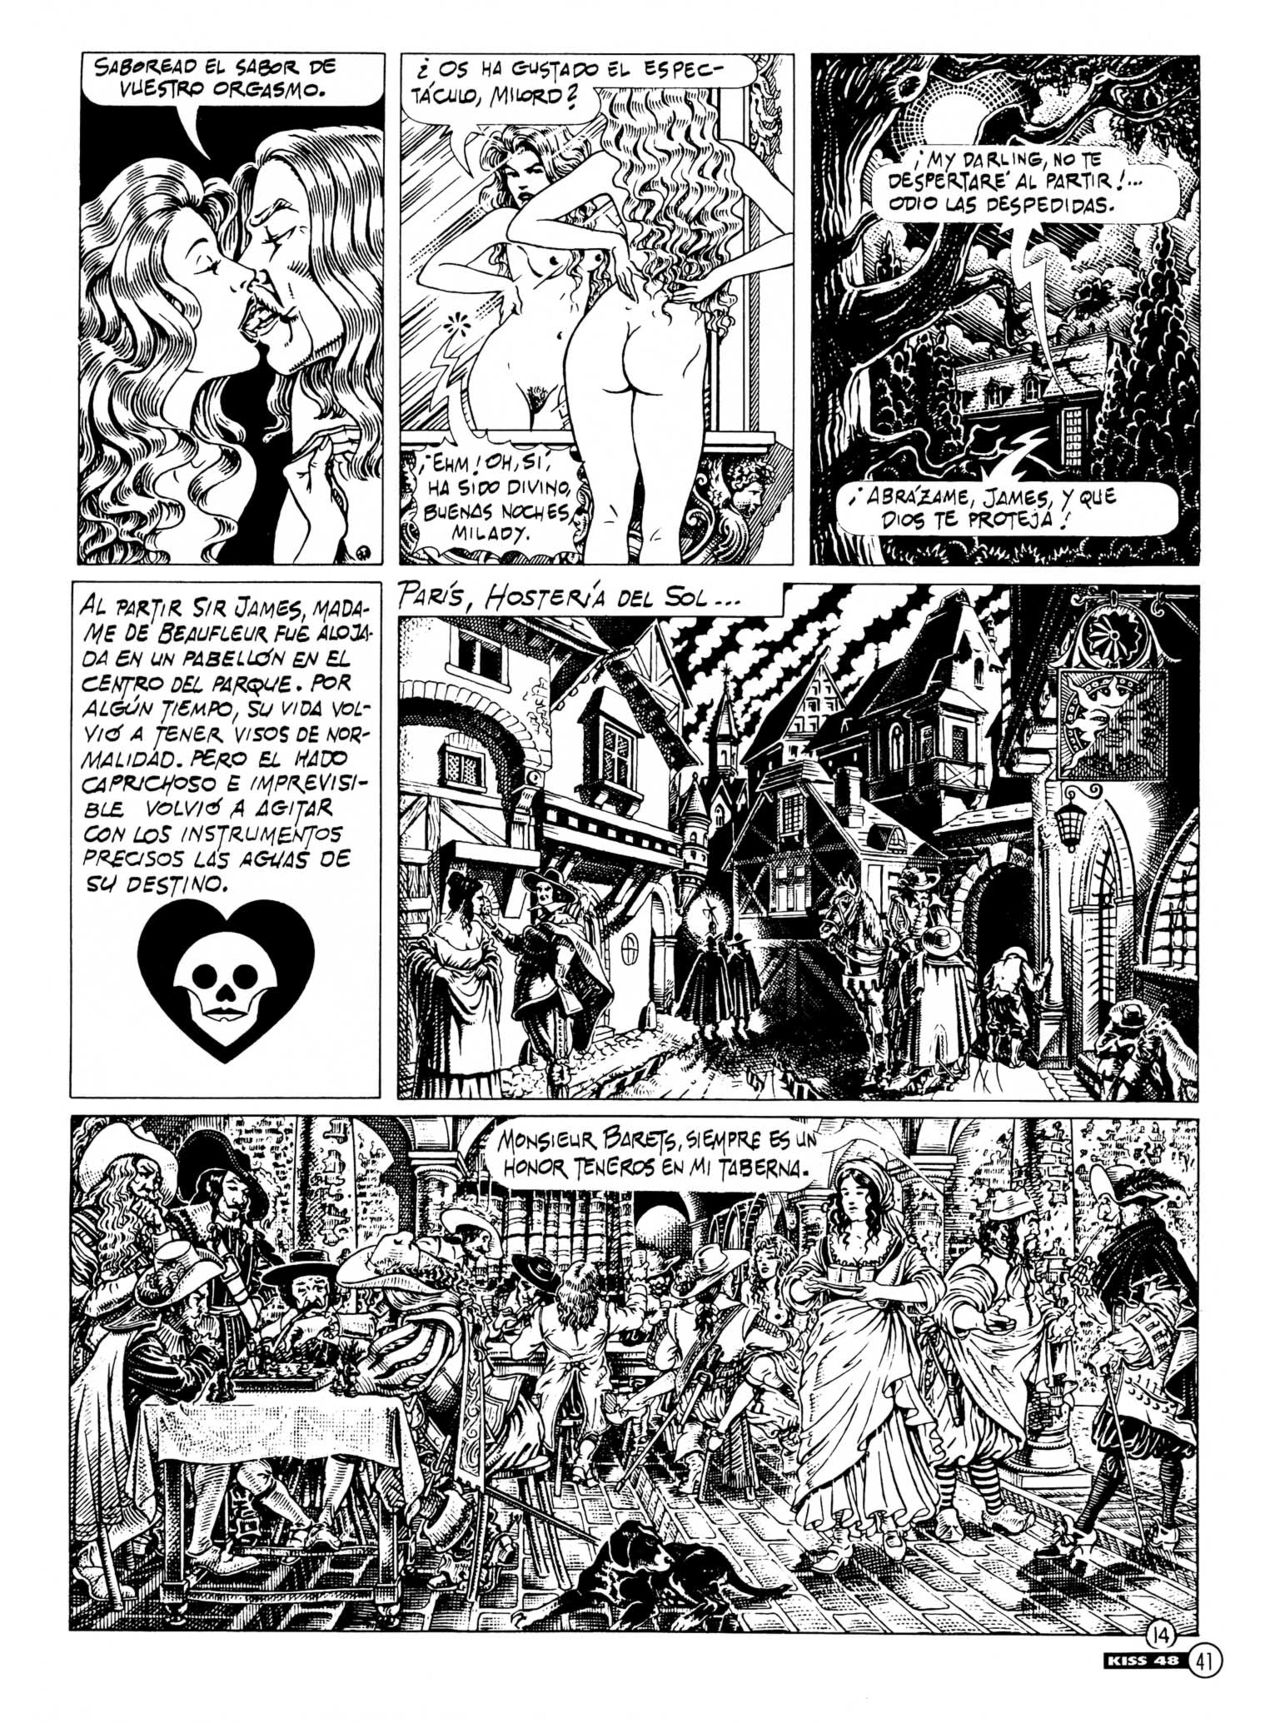 Kiss comix 048 image number 40